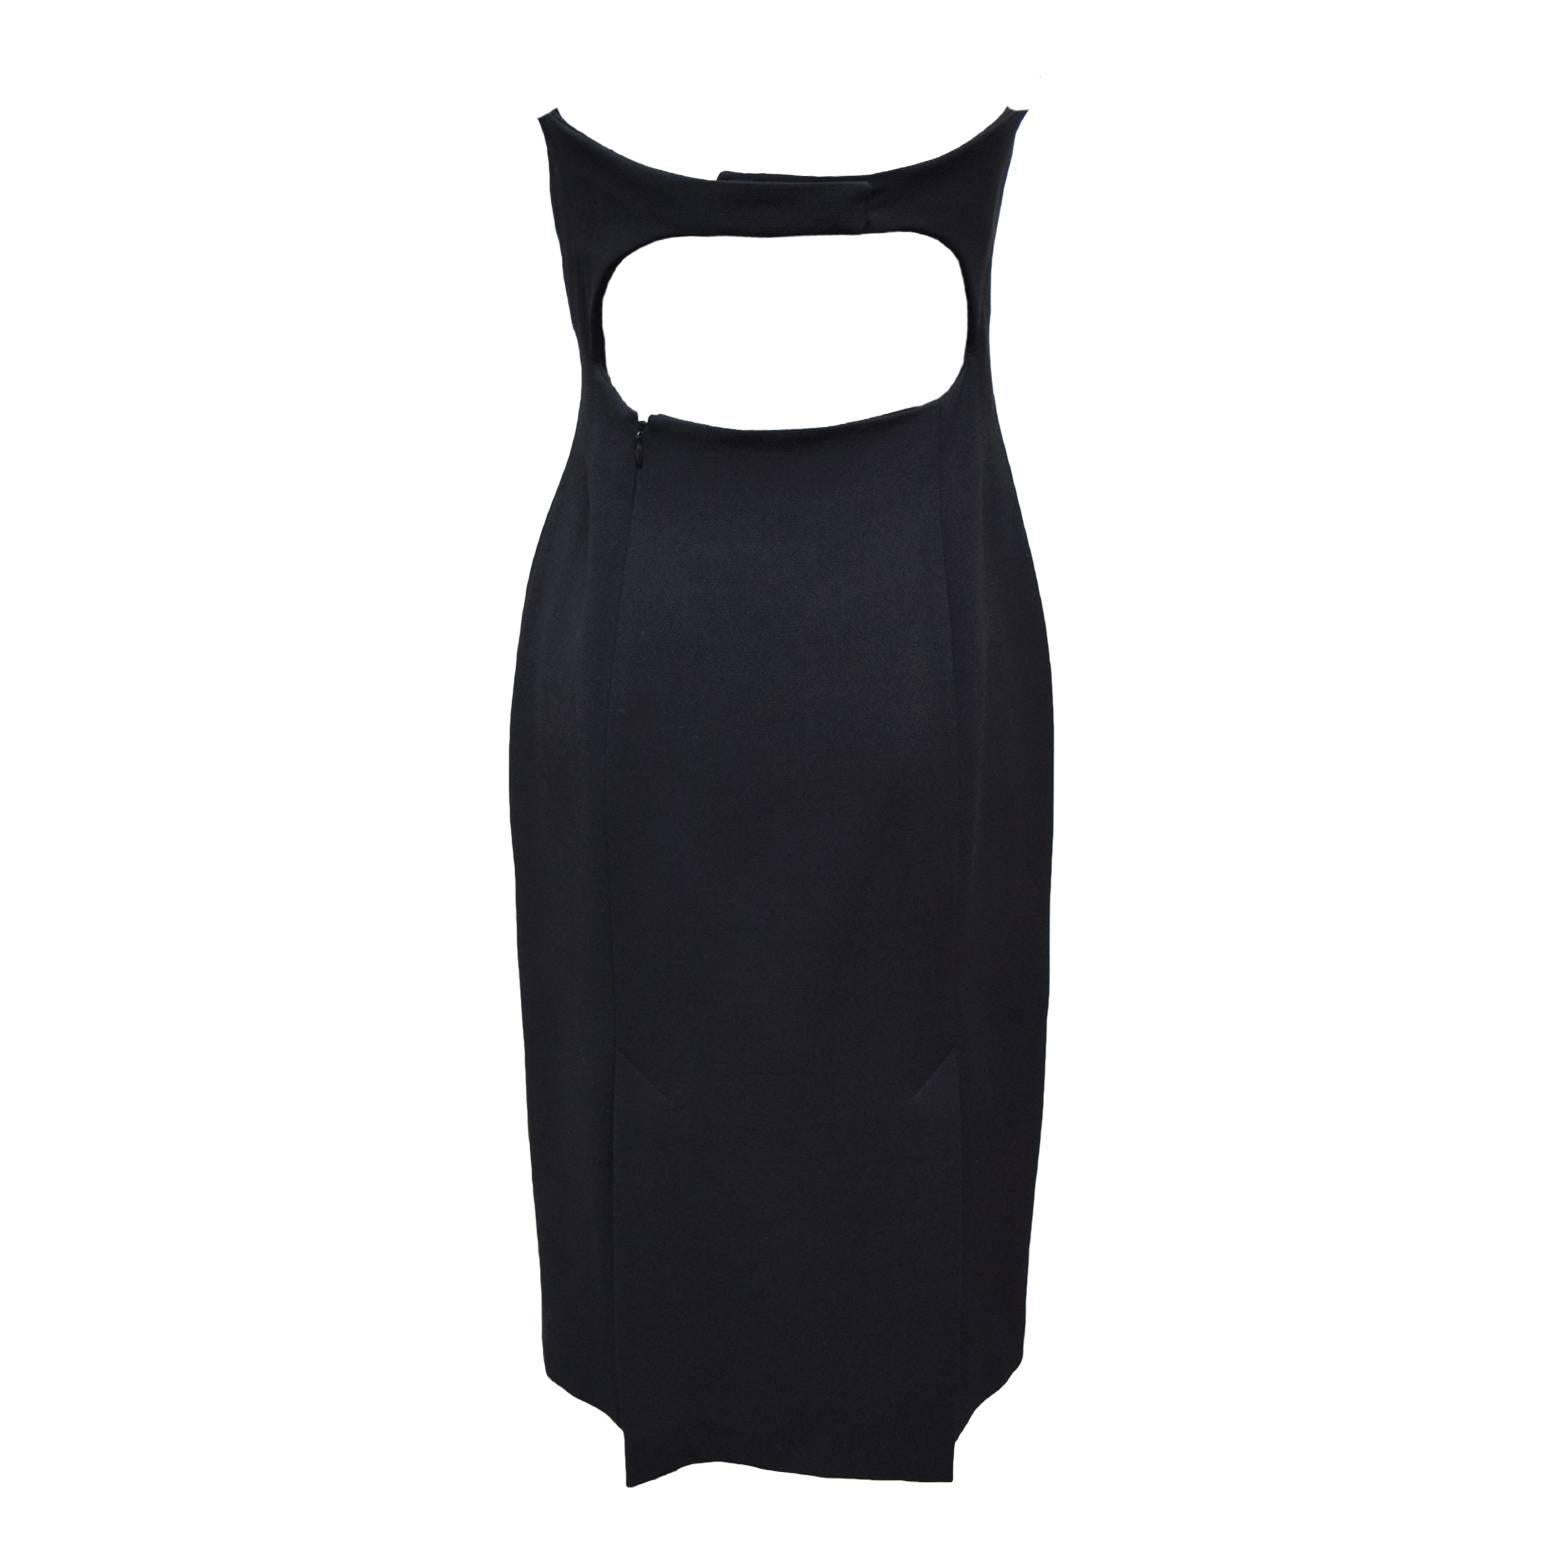 This elegant dress by Charles Chang-Lima is a strapless dress made out of black wool and is fully lined in silk. The neckline is a scoop-like neckline and has a freshwater pearl at each end. The back has a cutout detail and zips from a side panel in